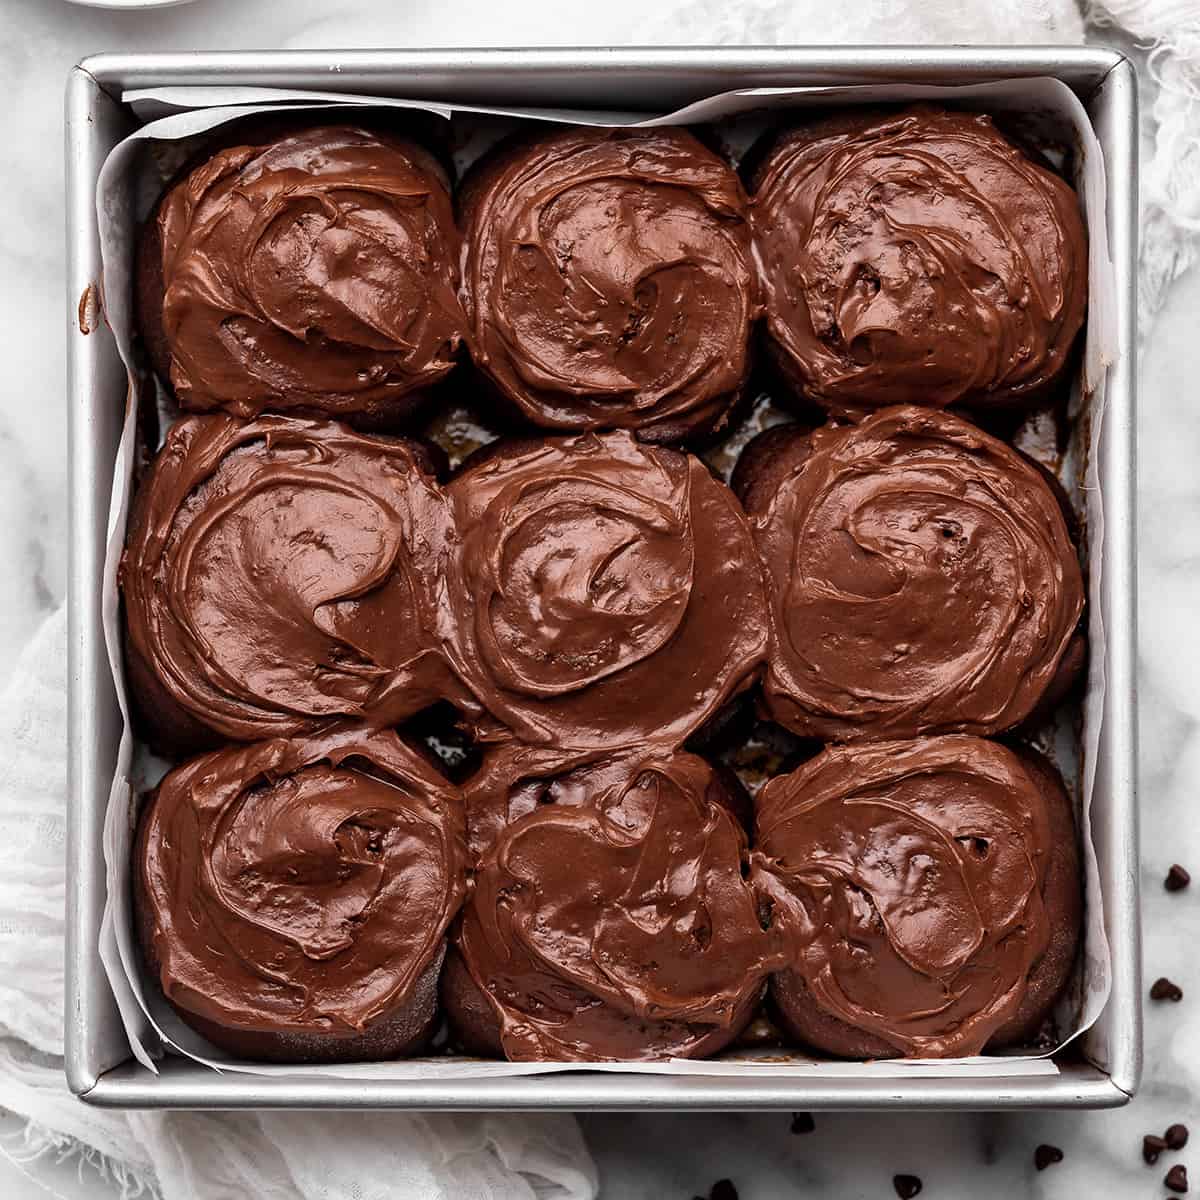 9 Chocolate Cinnamon Rolls in a baking pan with chocolate frosting